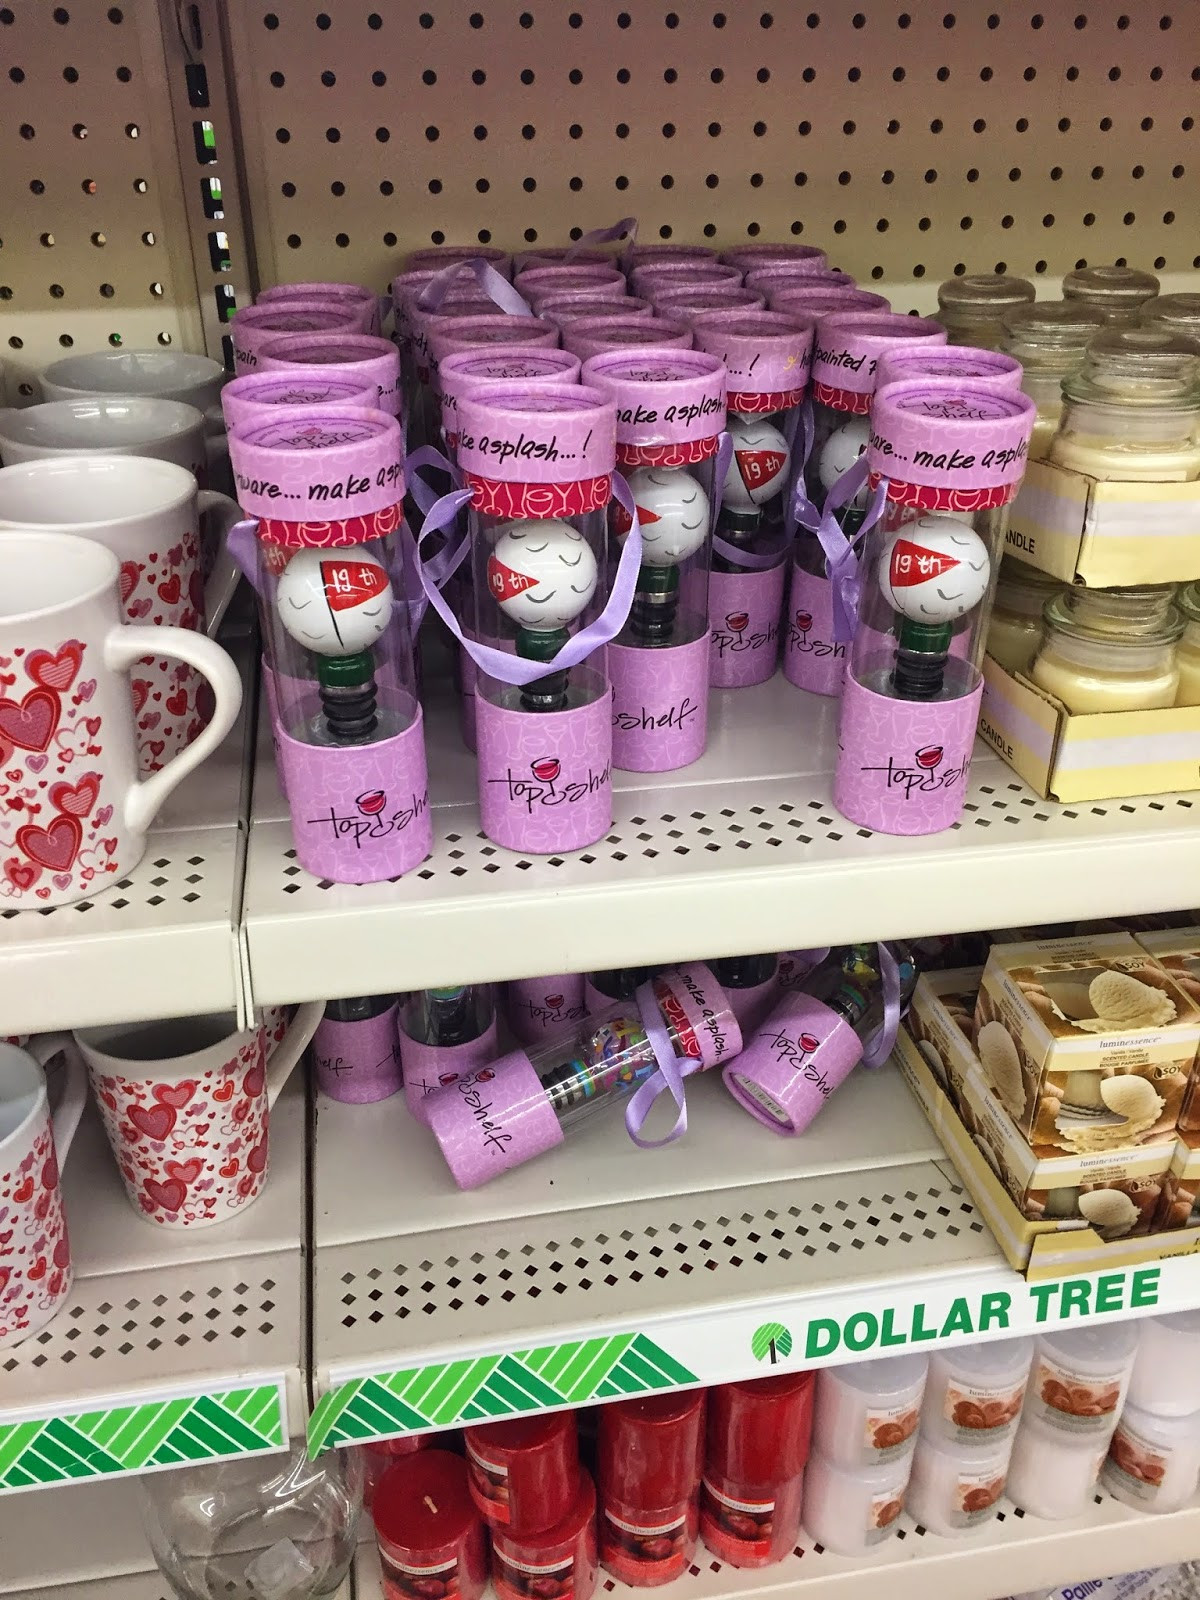 10 Trendy Bulk Vases Dollar Tree 2023 free download bulk vases dollar tree of dolla holla tree dollar tree finds 1 13 15 intended for top shelf wine bottle stoppers golf ball one and colorful celebrate ones